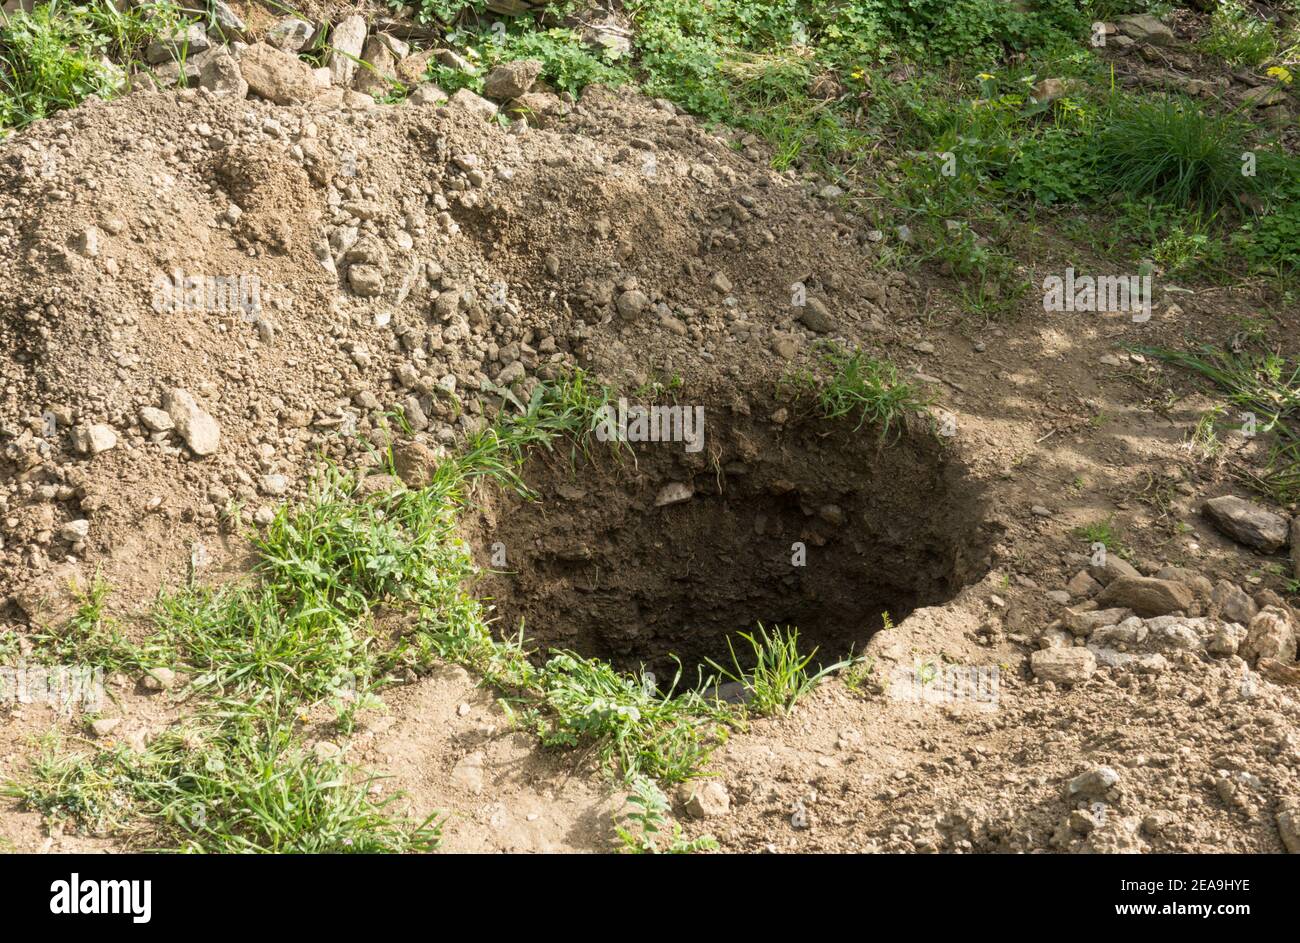 Deep hole in the ground in a garden. Stock Photo